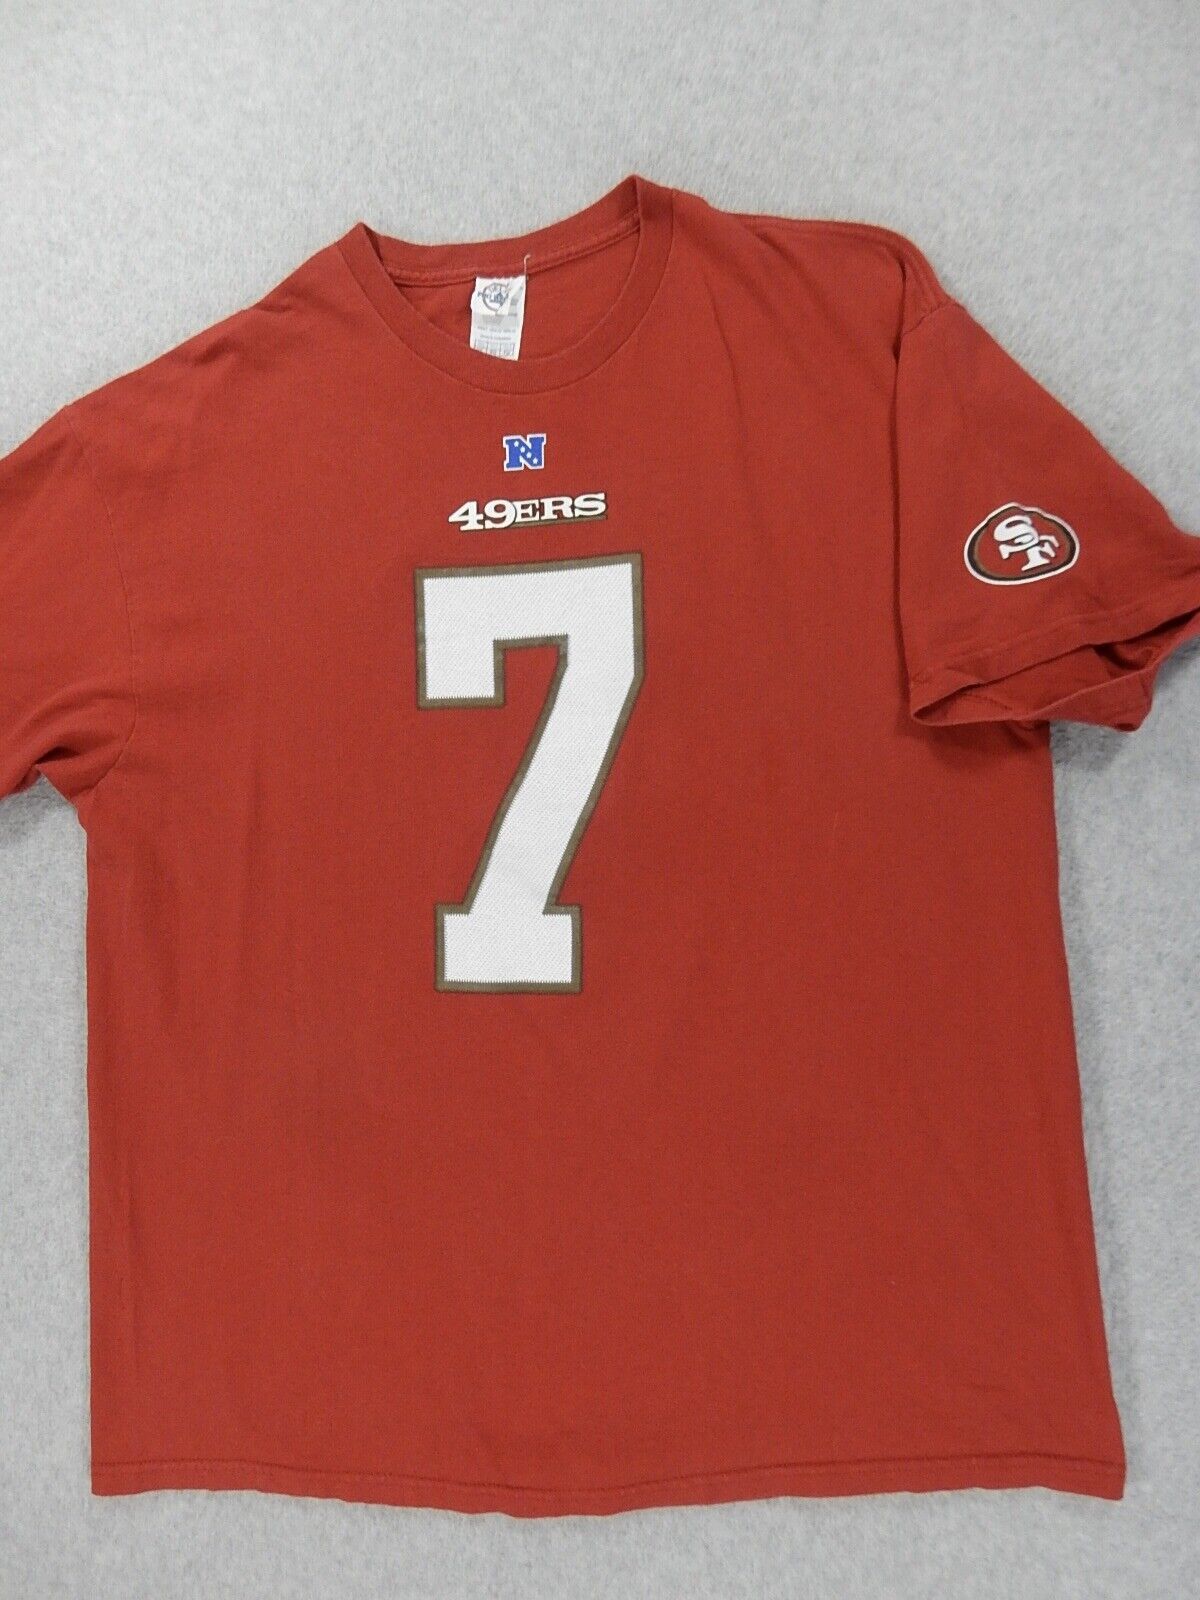 7 49ers jersey